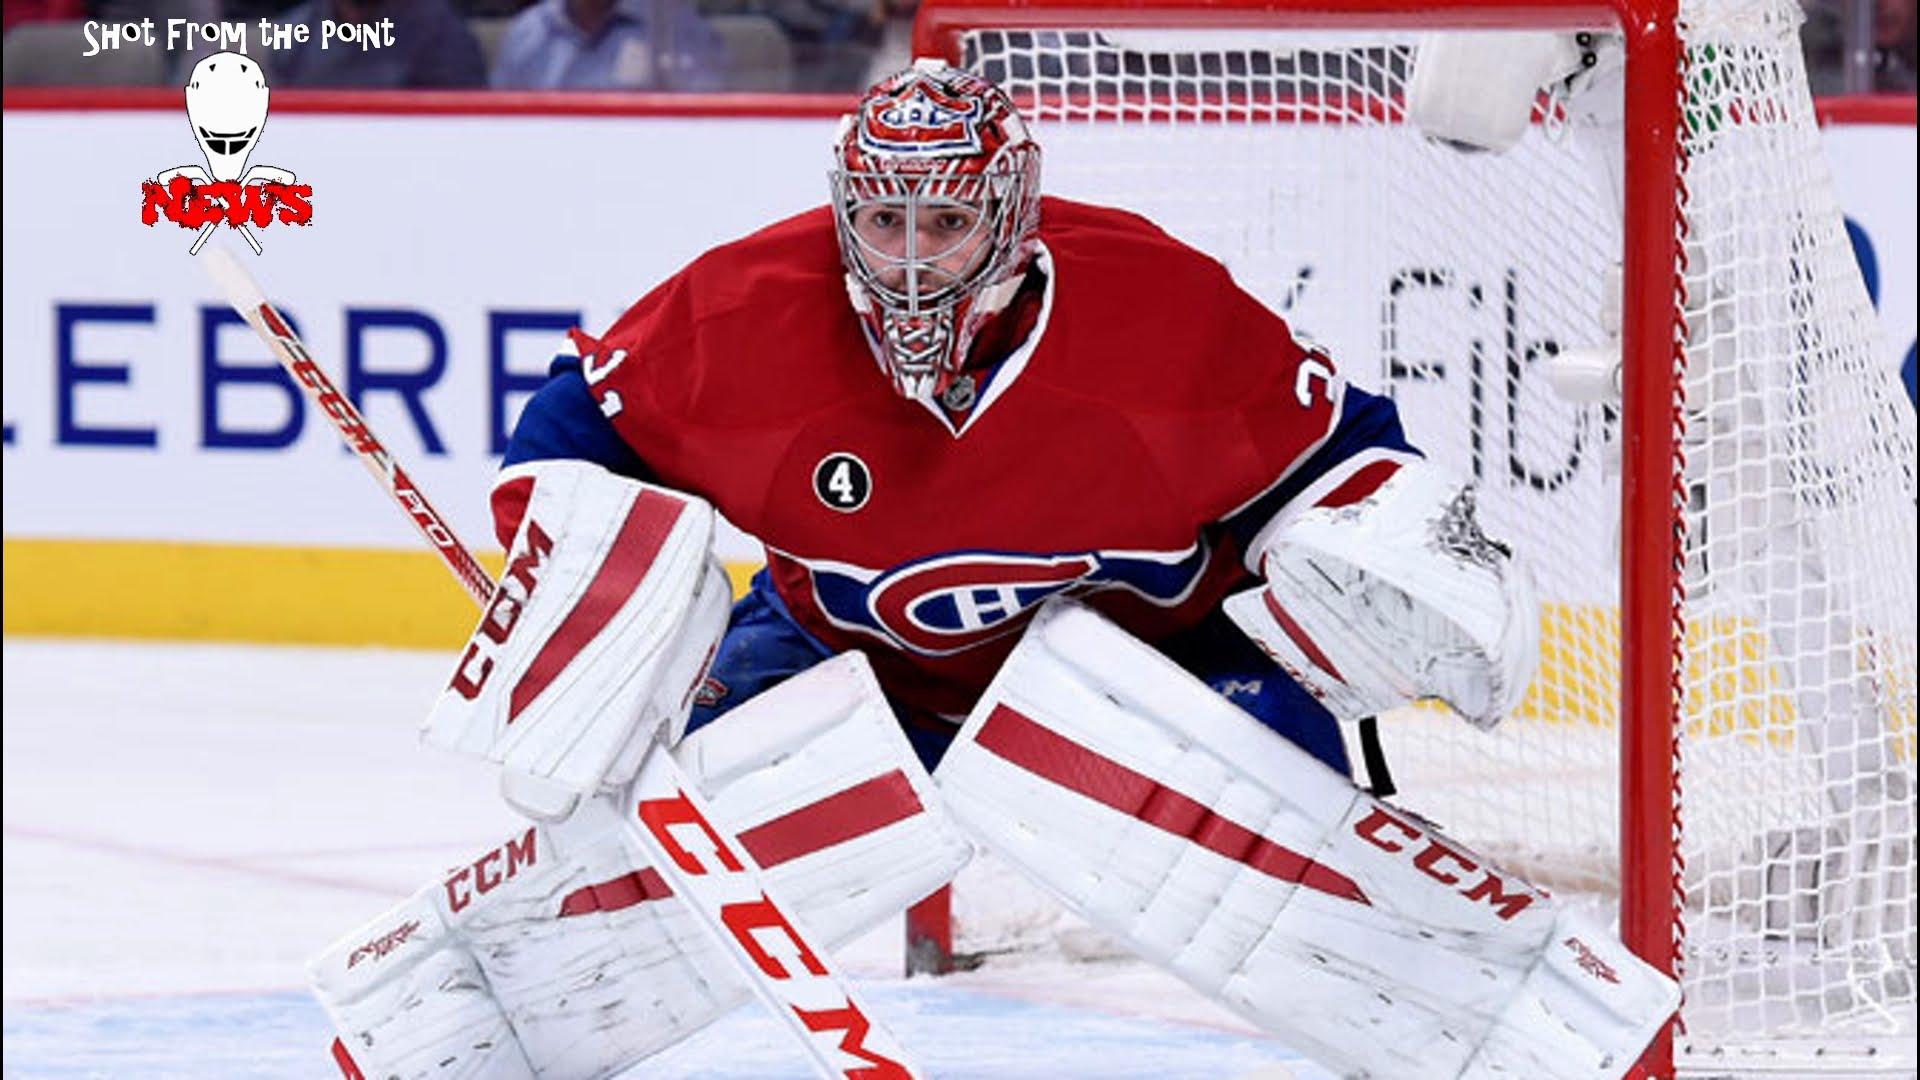 Carey Price out for rest of 2016 season (Rumor)